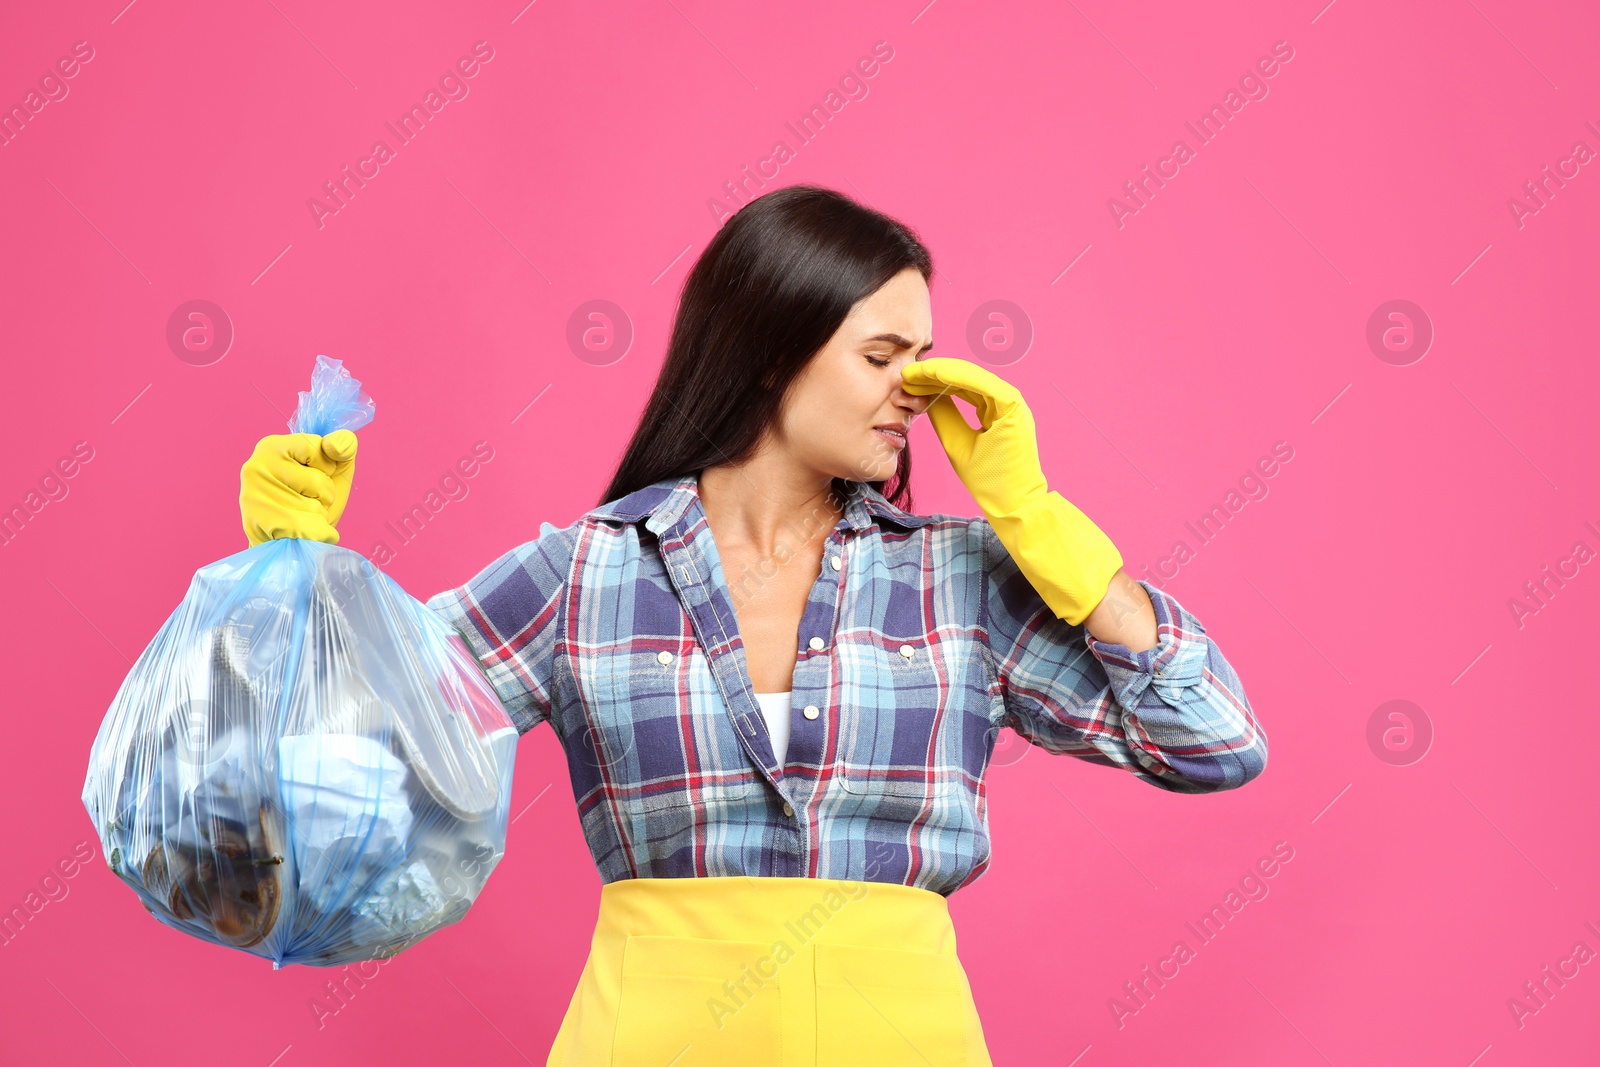 Photo of Woman holding full garbage bag on pink background